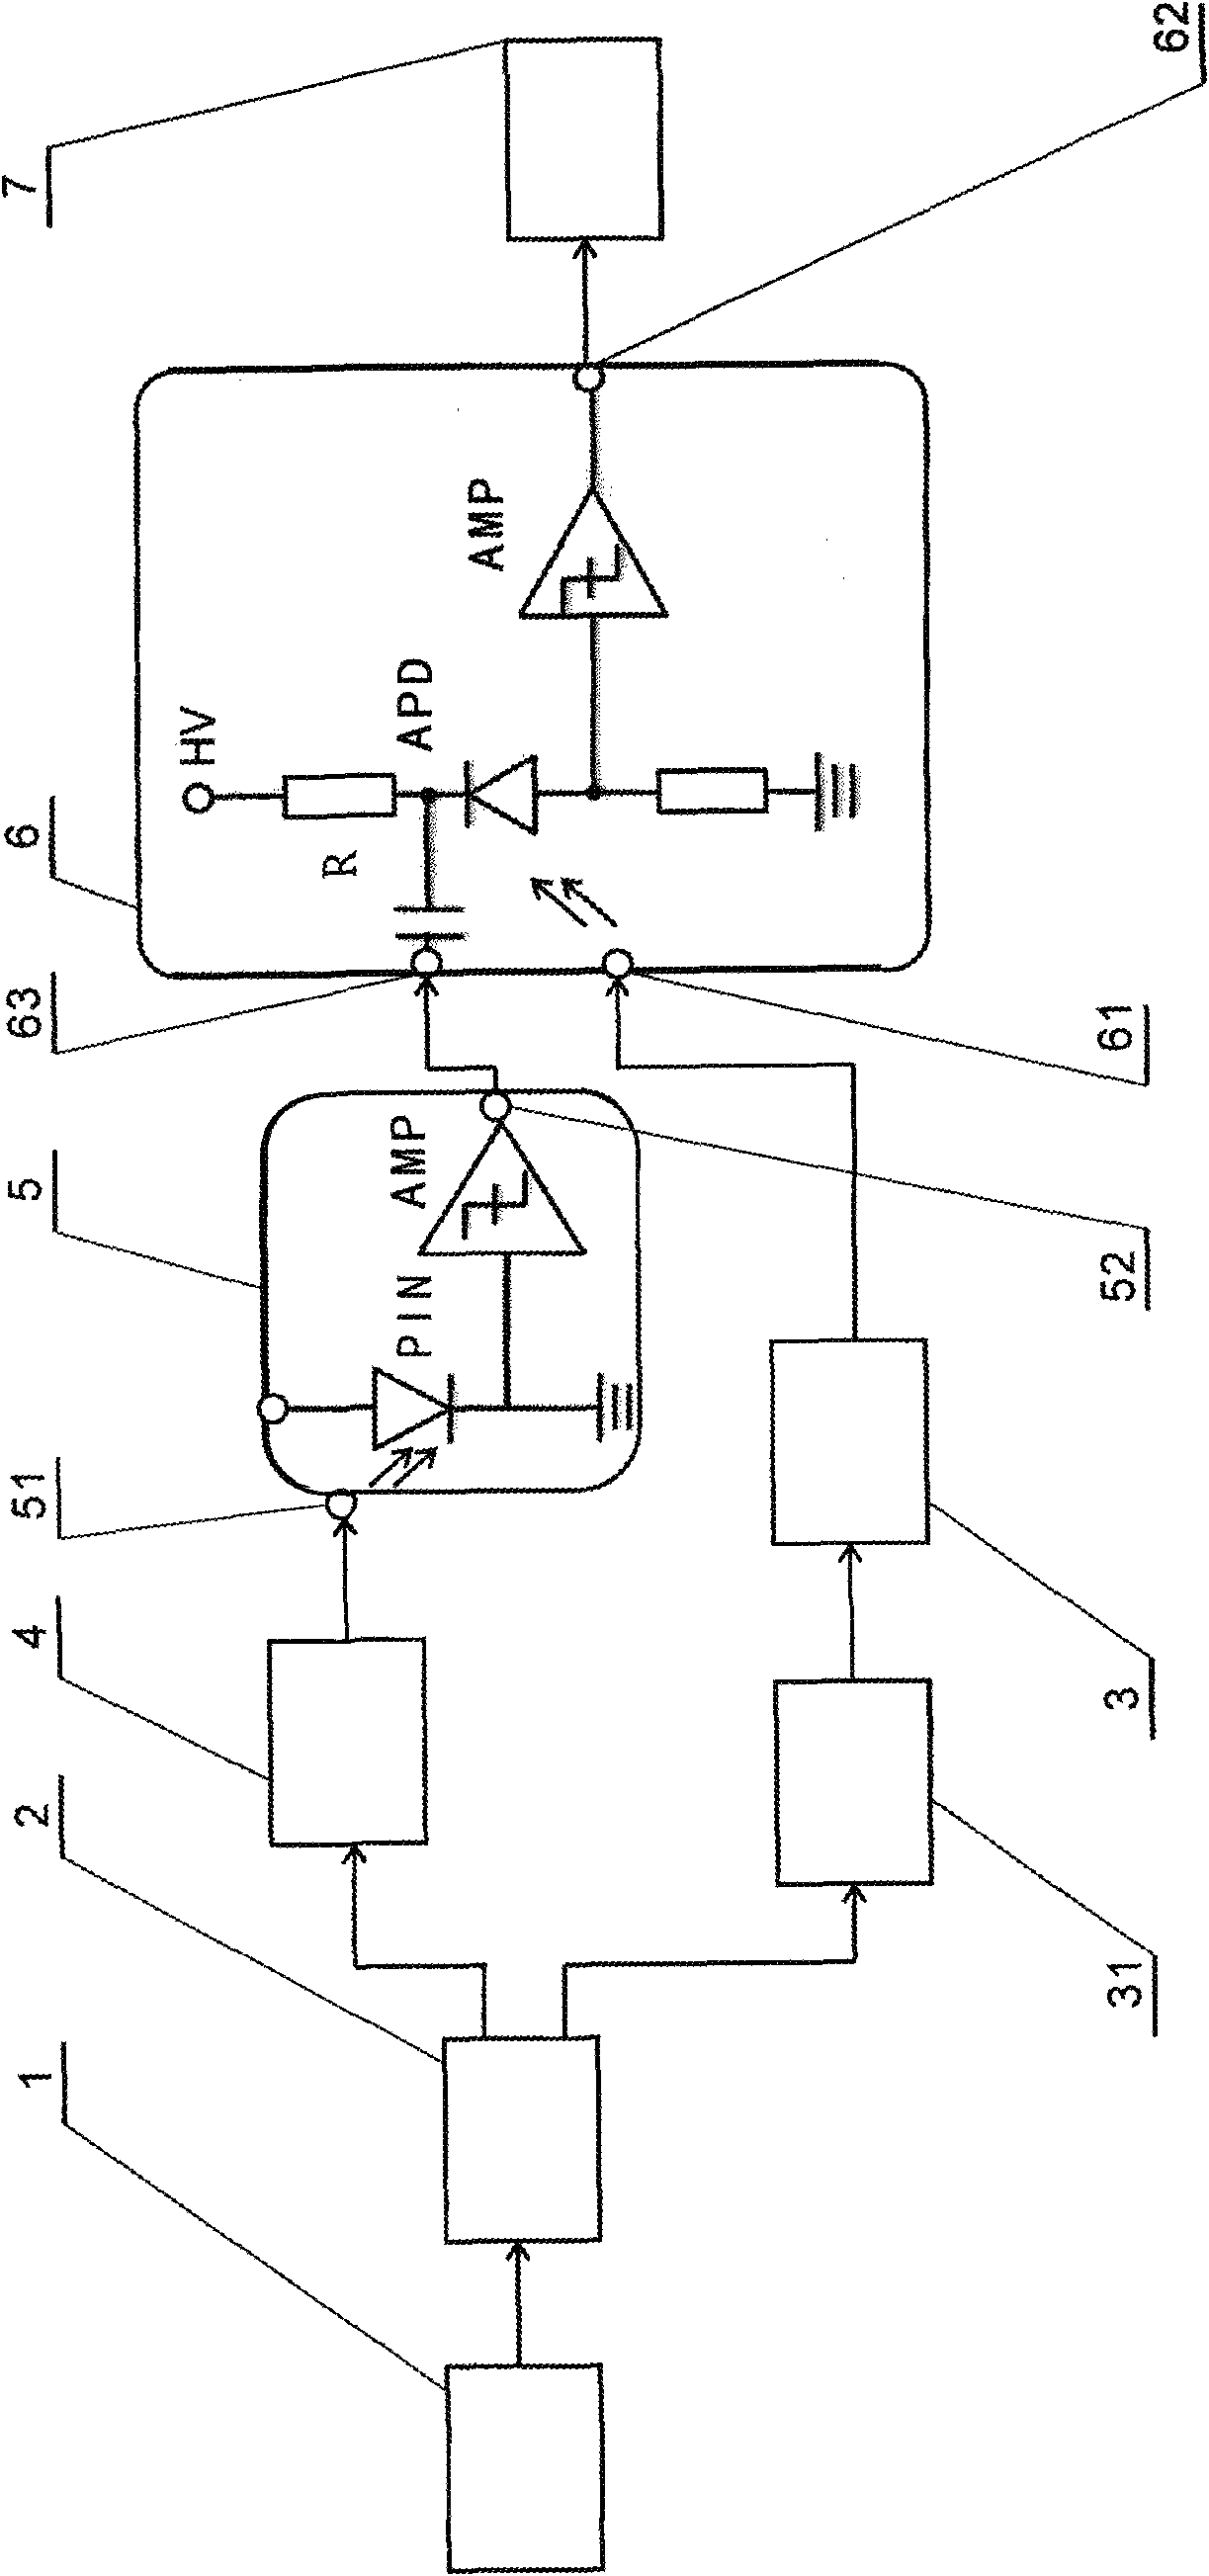 High time resolution low noise single photon detector based on optical pulse synchronization